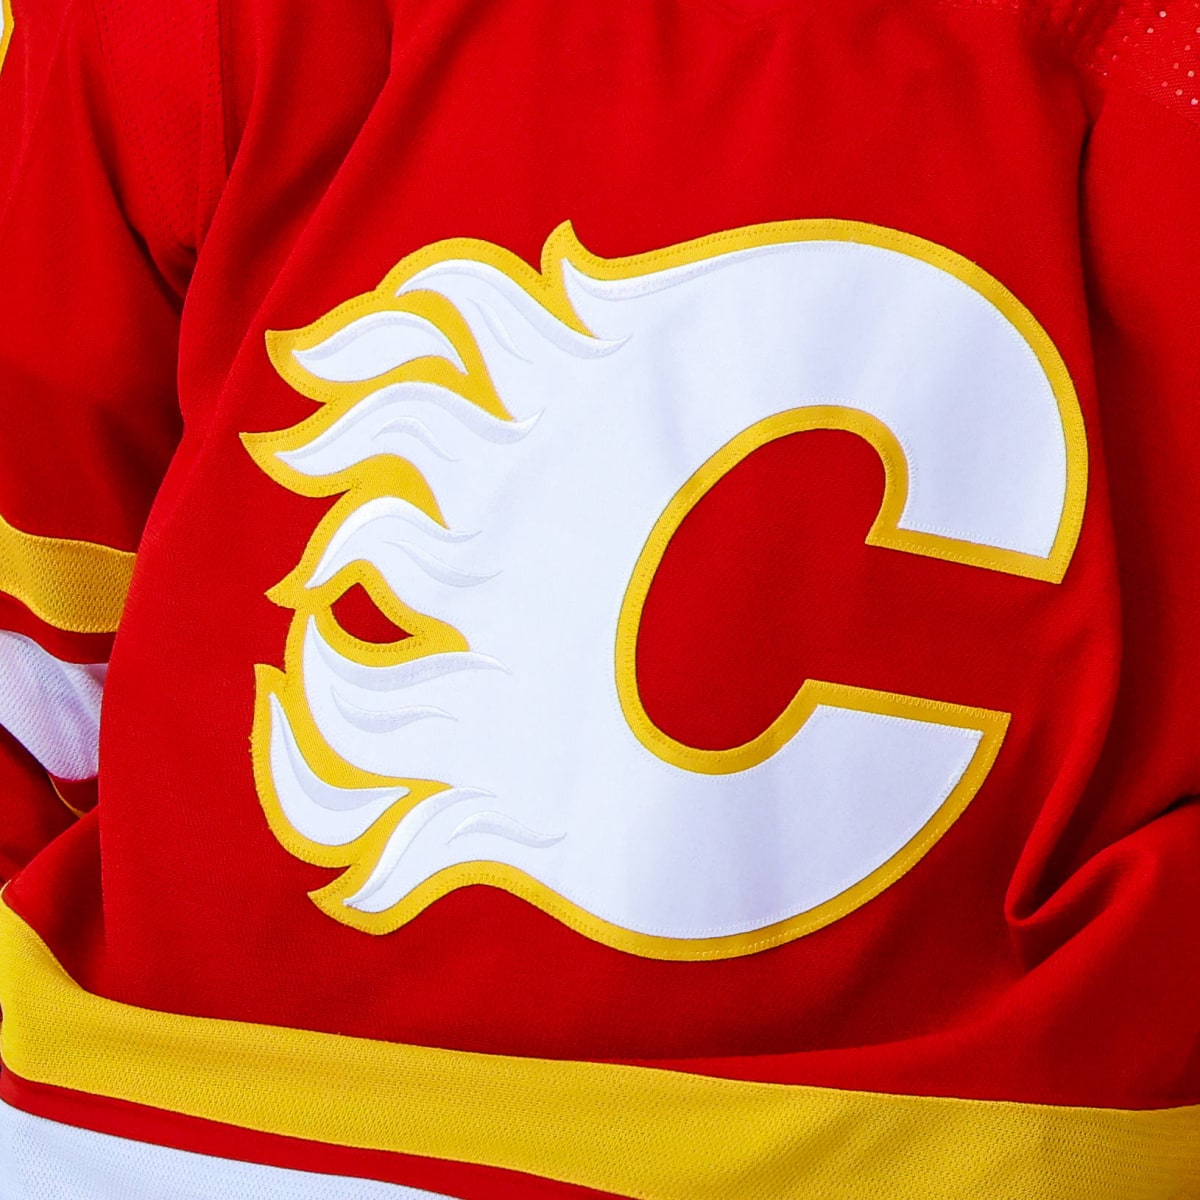 Report: Calgary Flames to Back Out of Arena Deal - The Hockey News